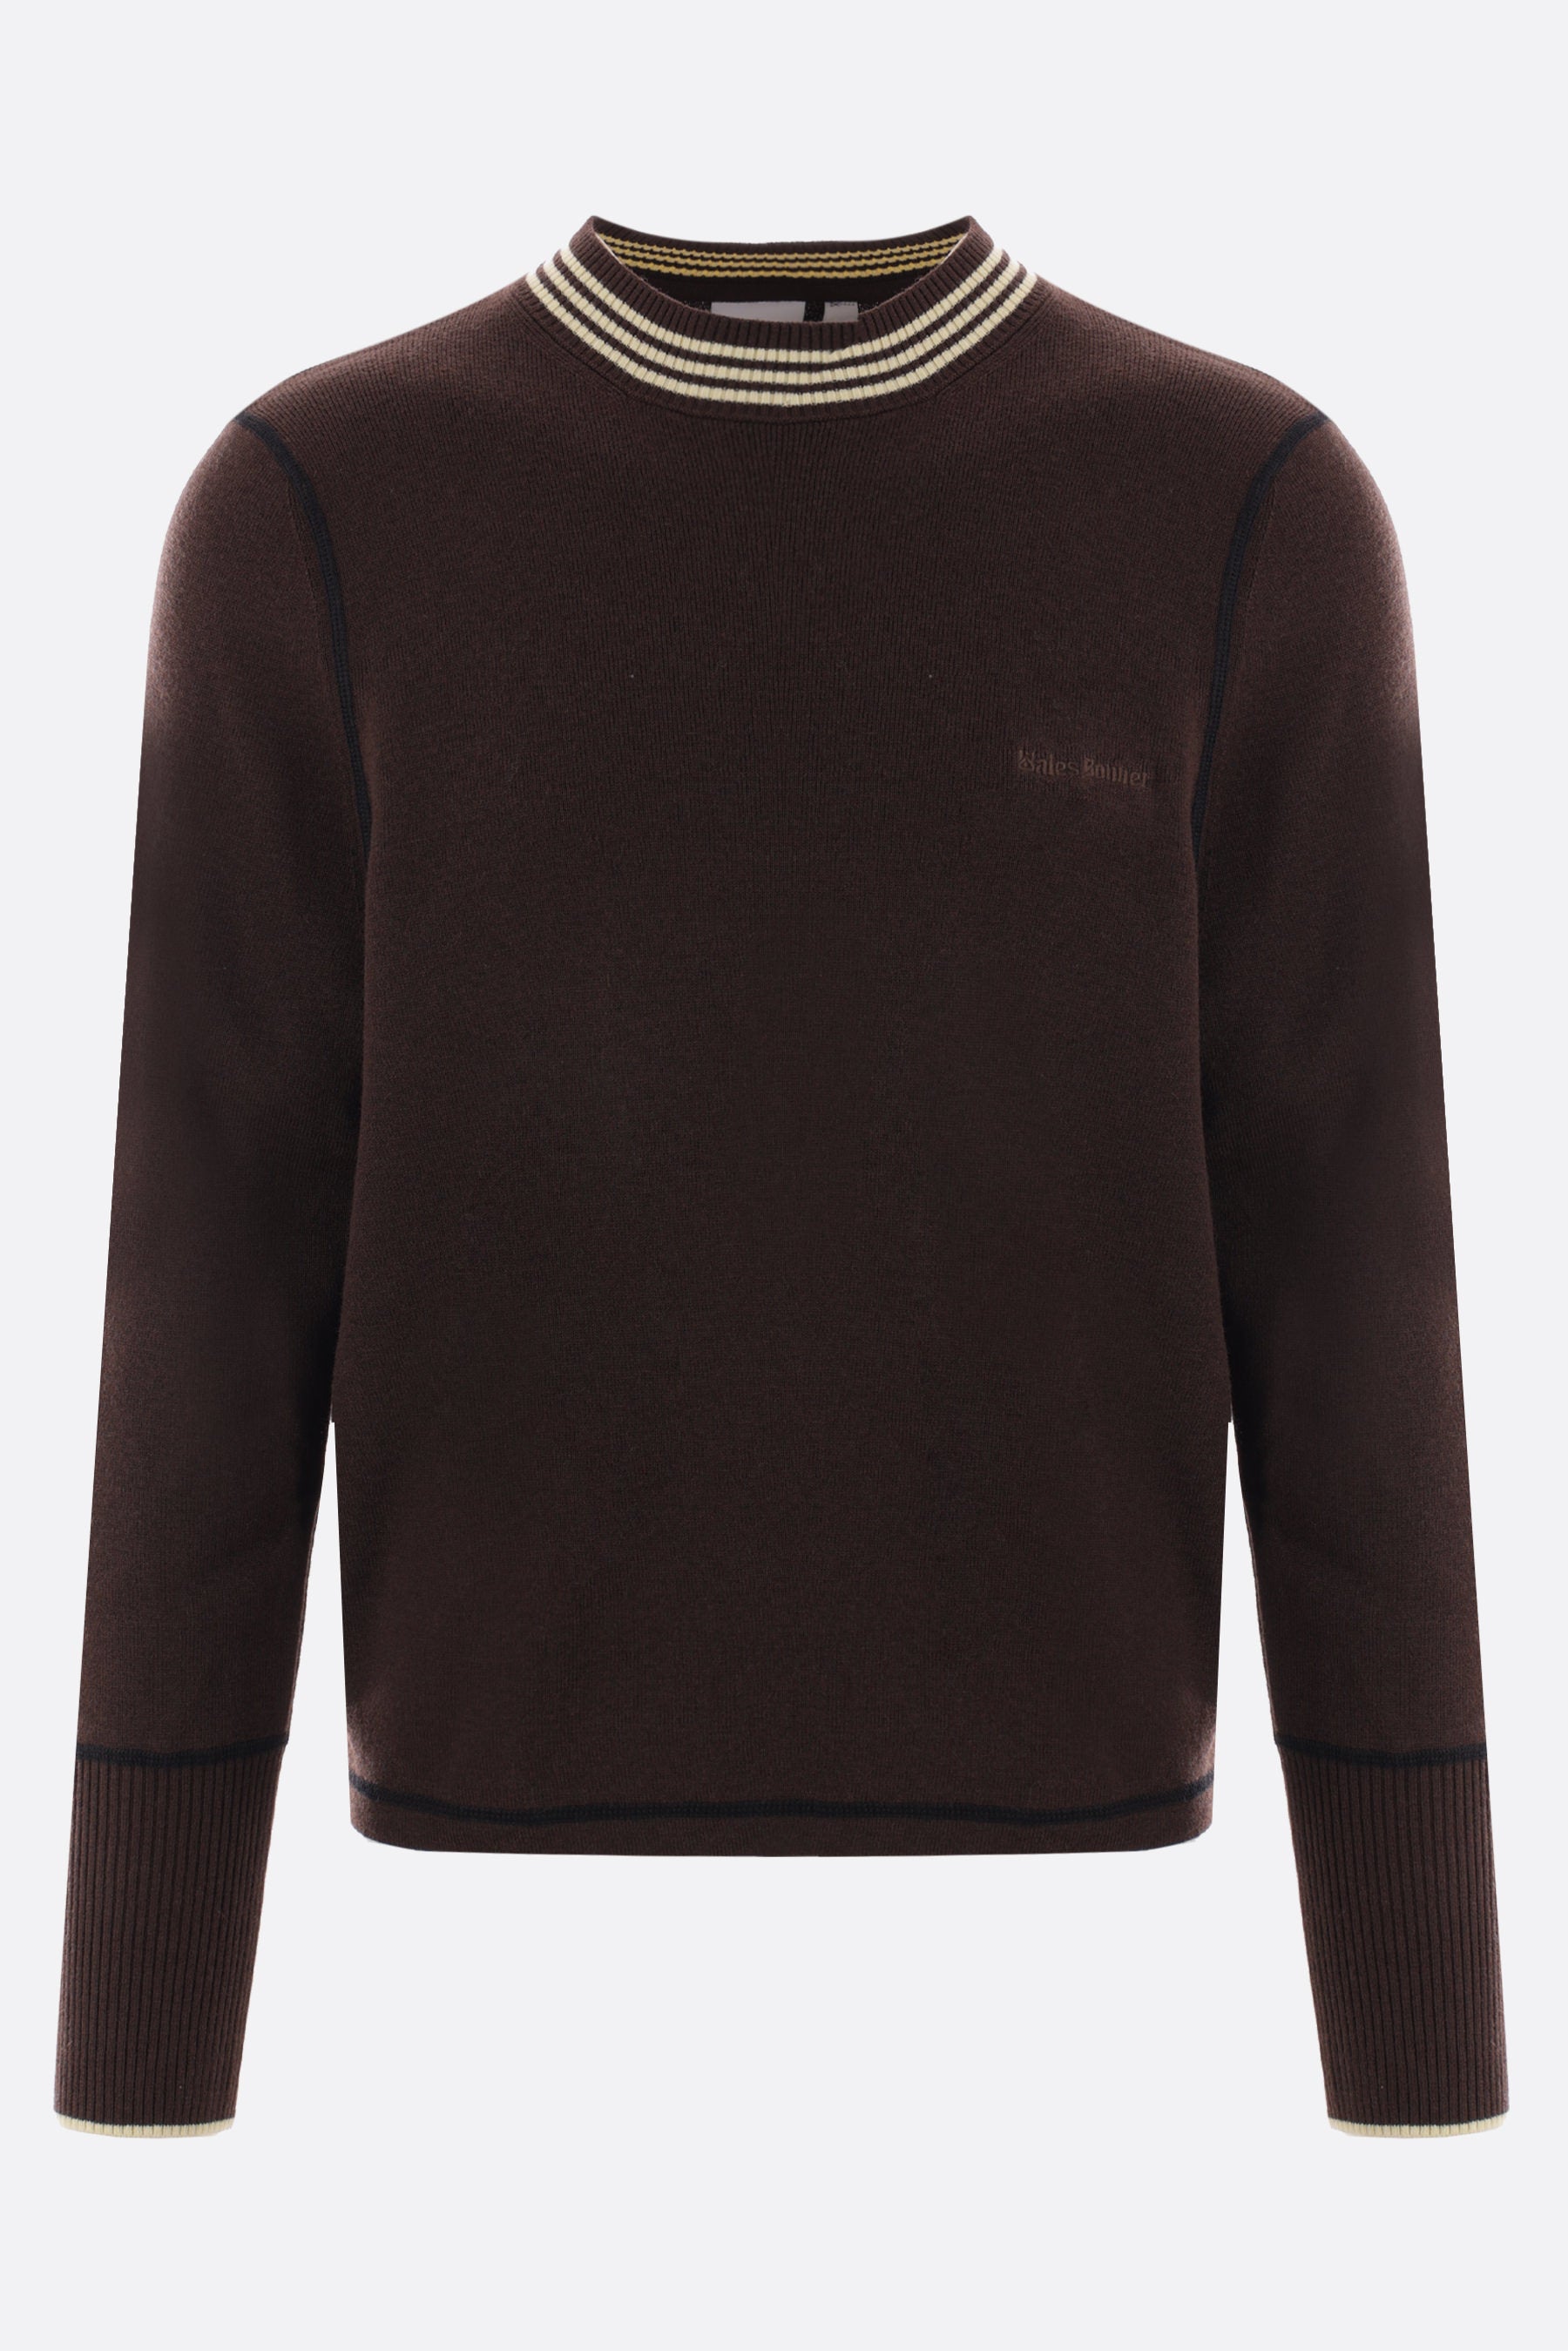 WB wool blend pullover